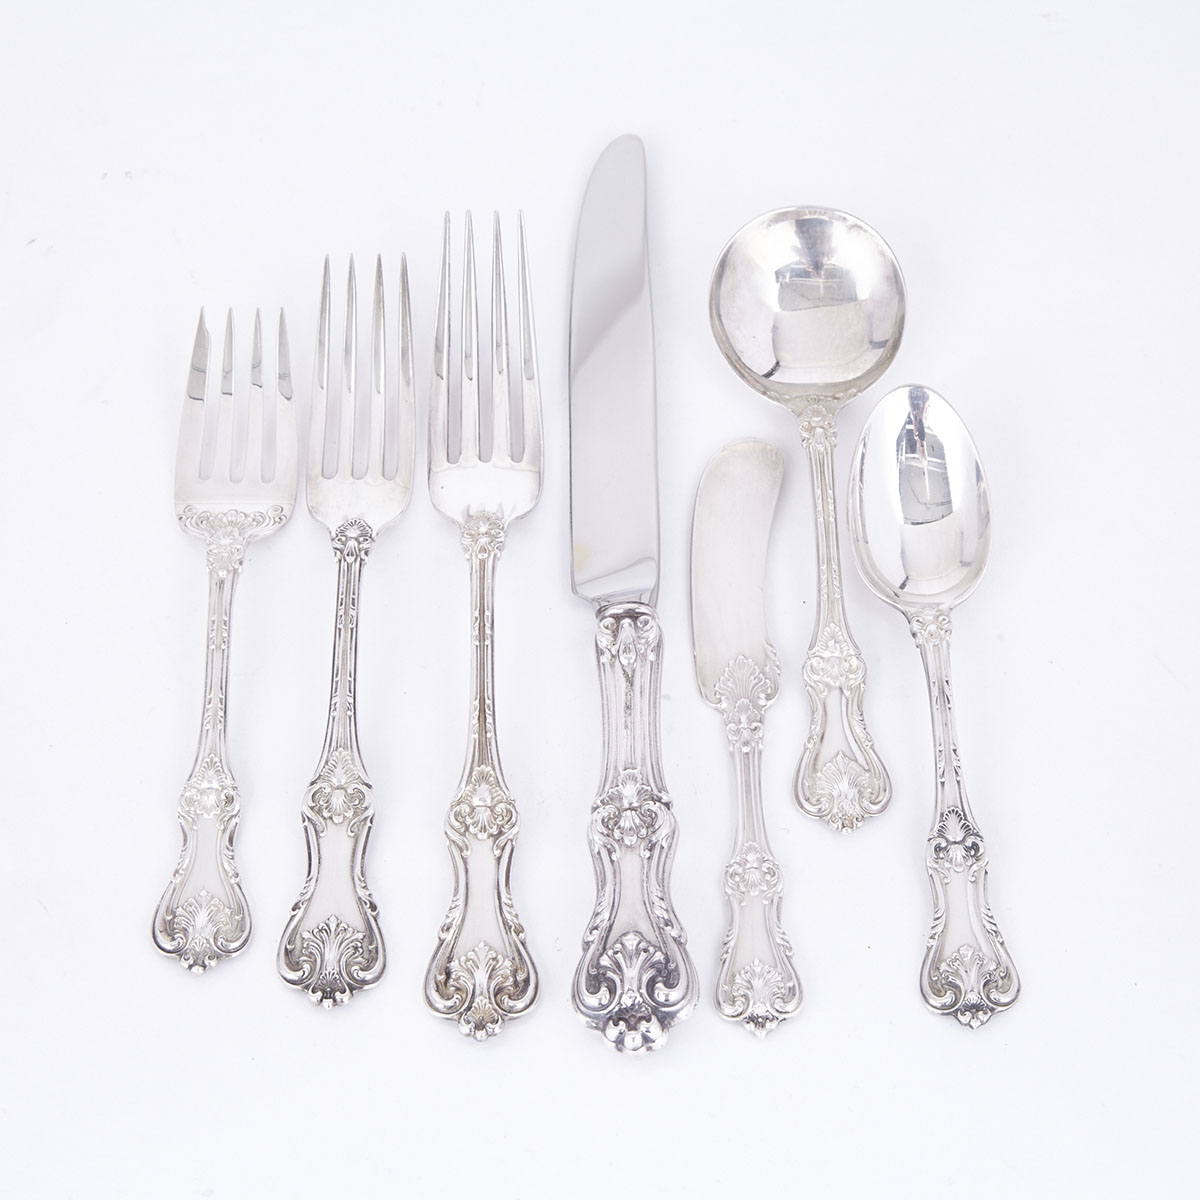 American Silver ‘Federal Cotillion’ Pattern Flatware Service, Frank W. Smith Silver Co., Gardner, Mass., early 20th century